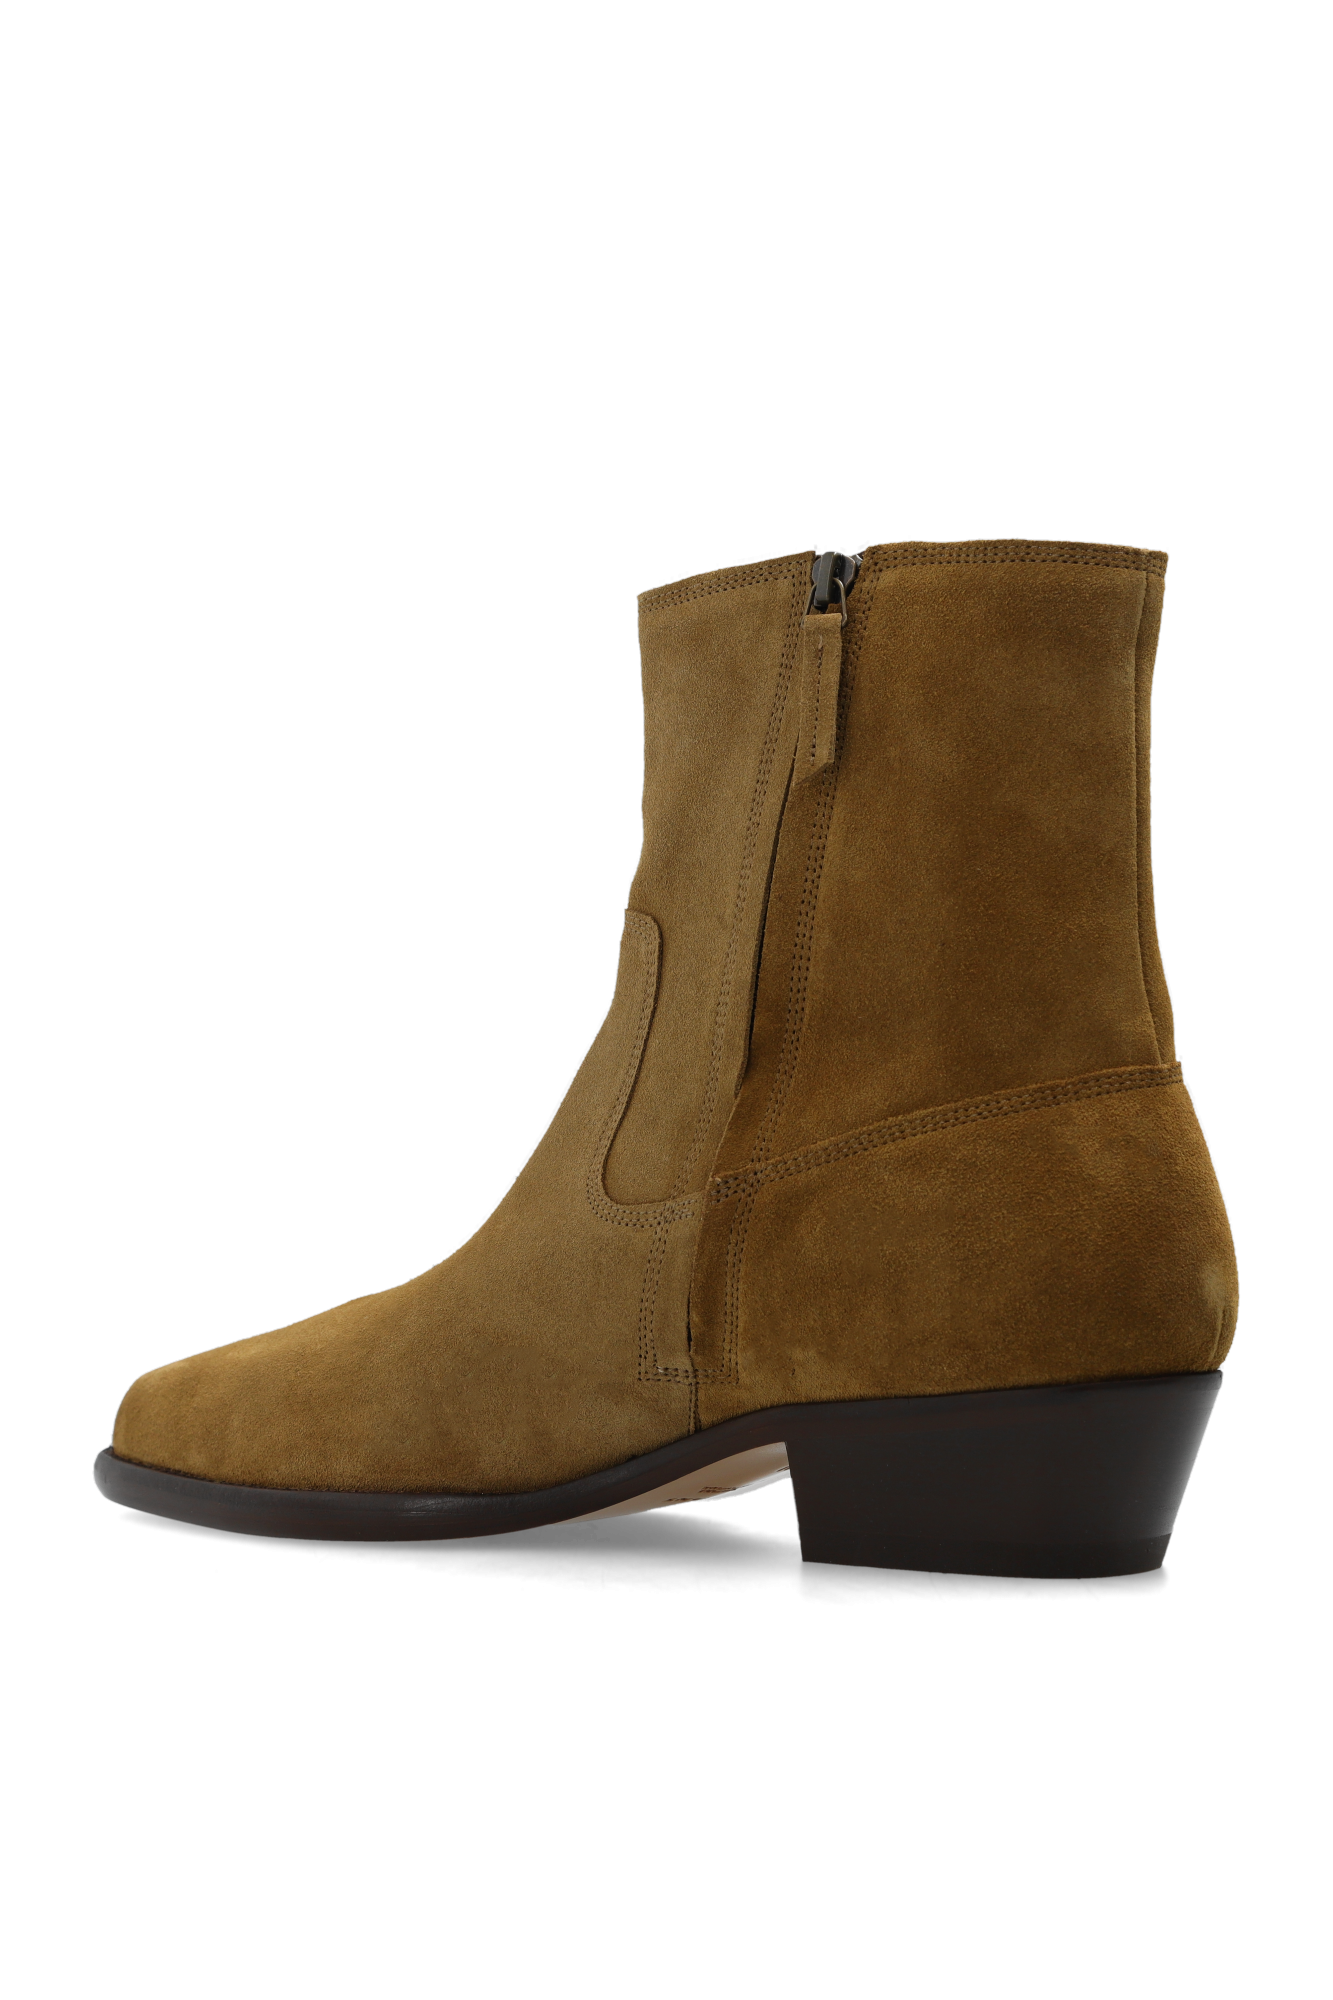 MARANT ‘Delix’ heeled ankle boots